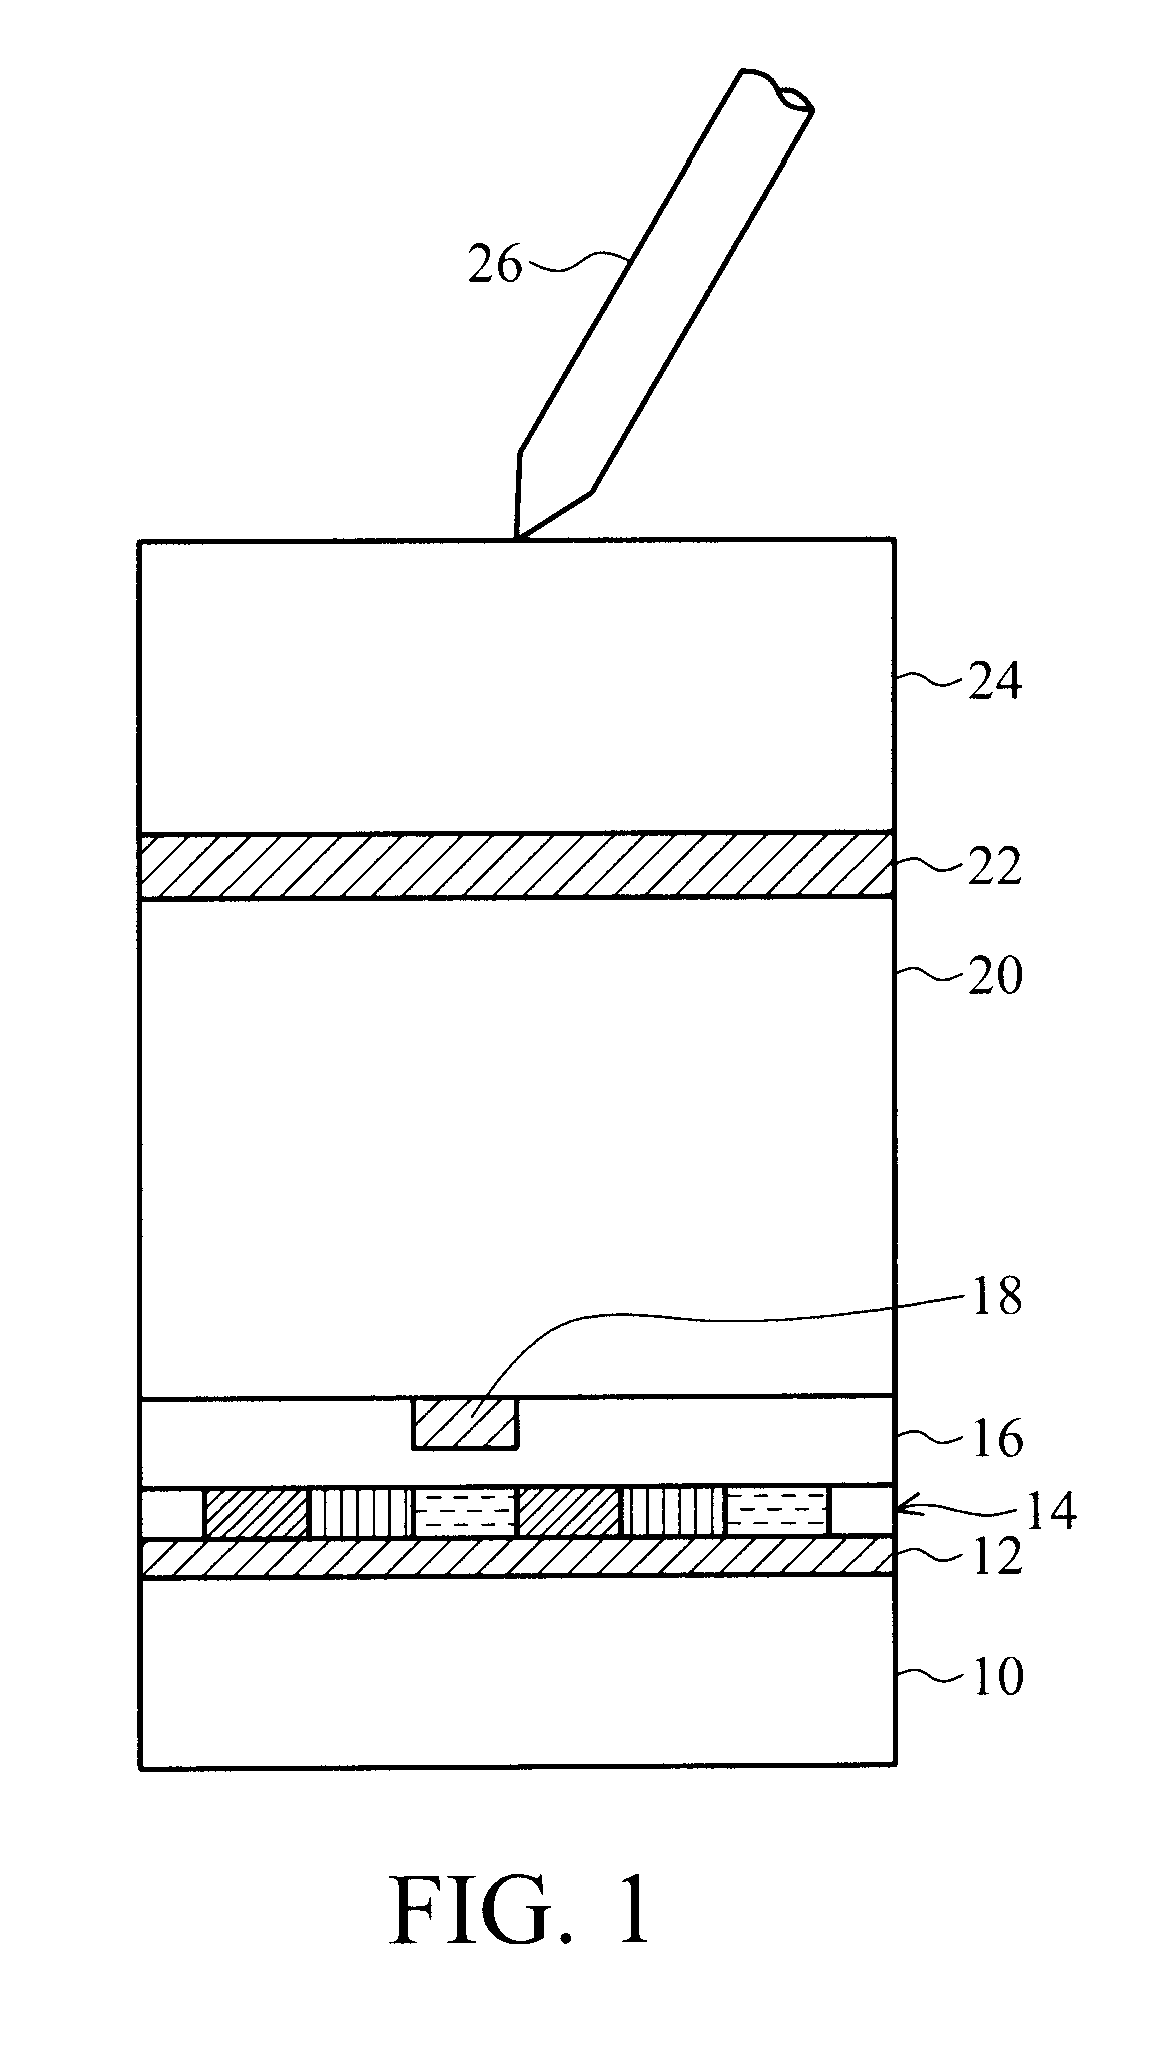 Display device with touch screen